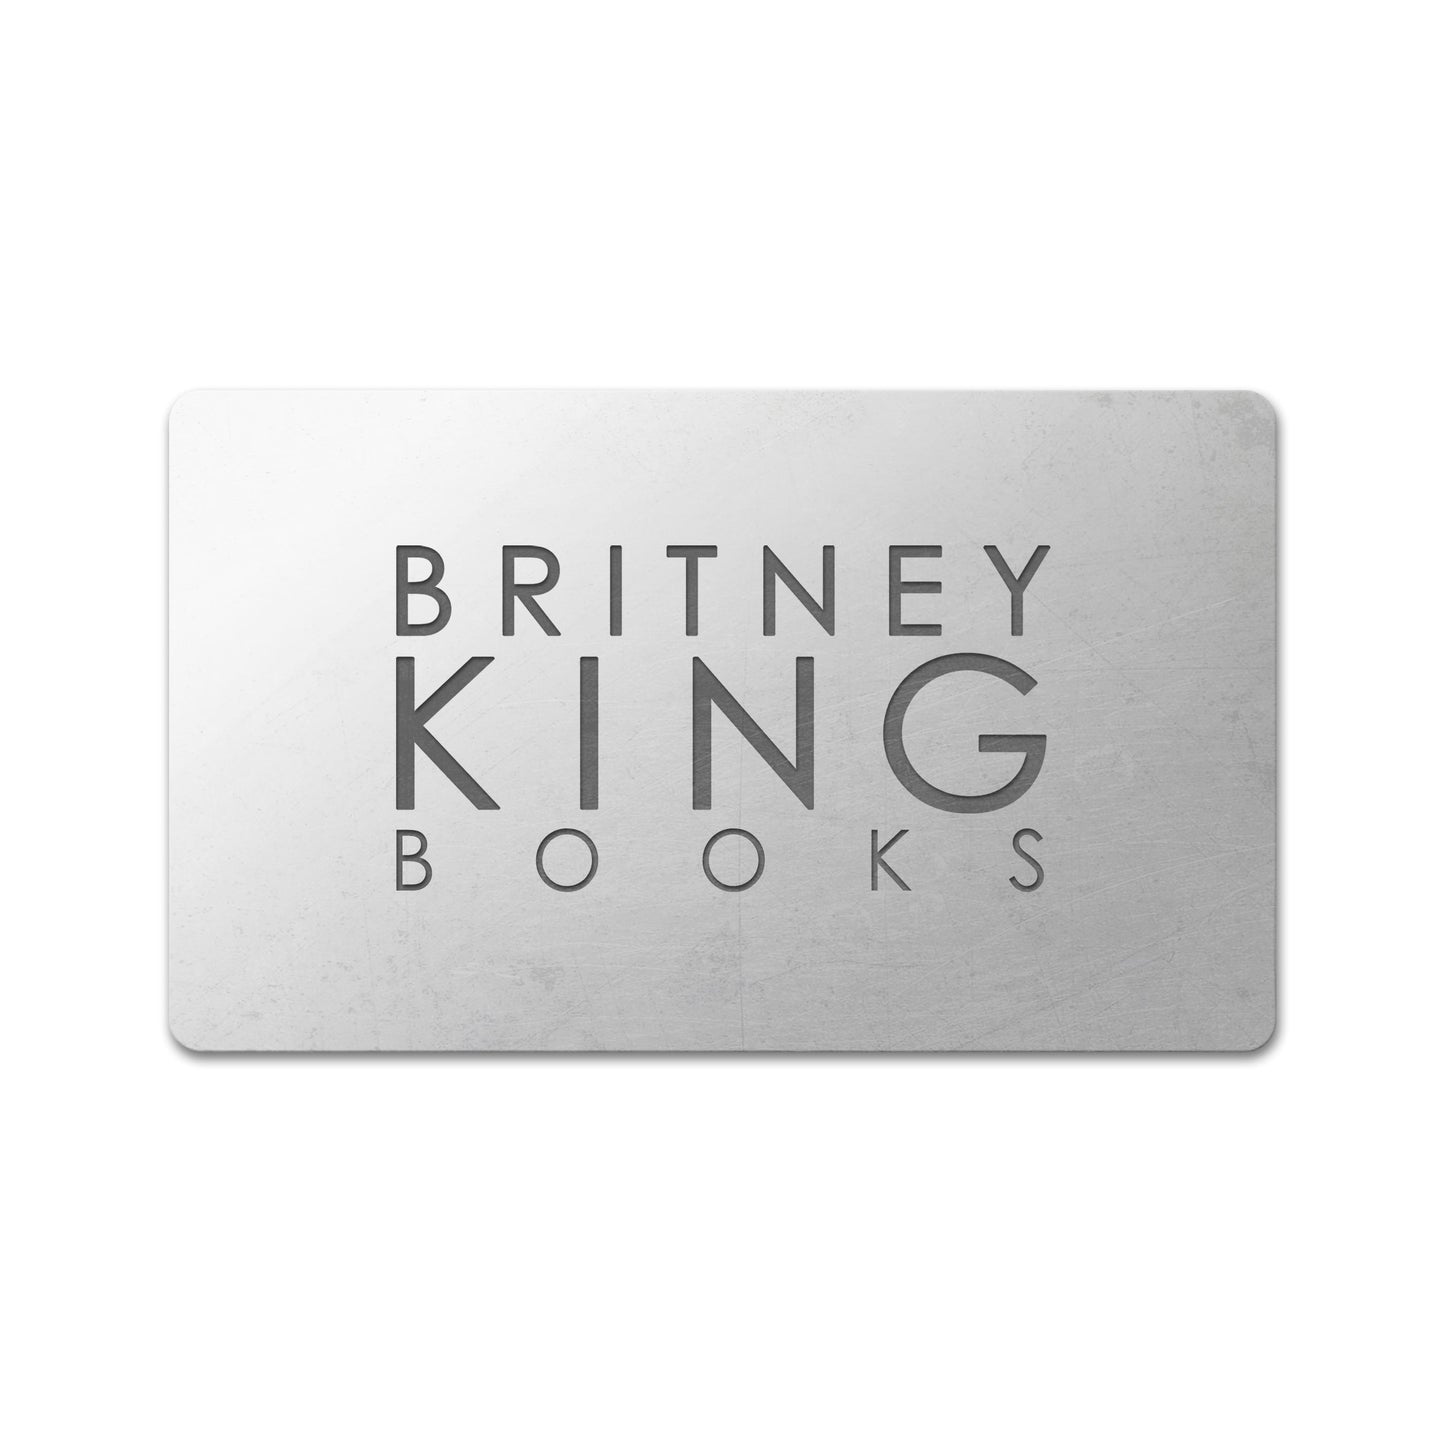 Britney King Book Shop Gift Card